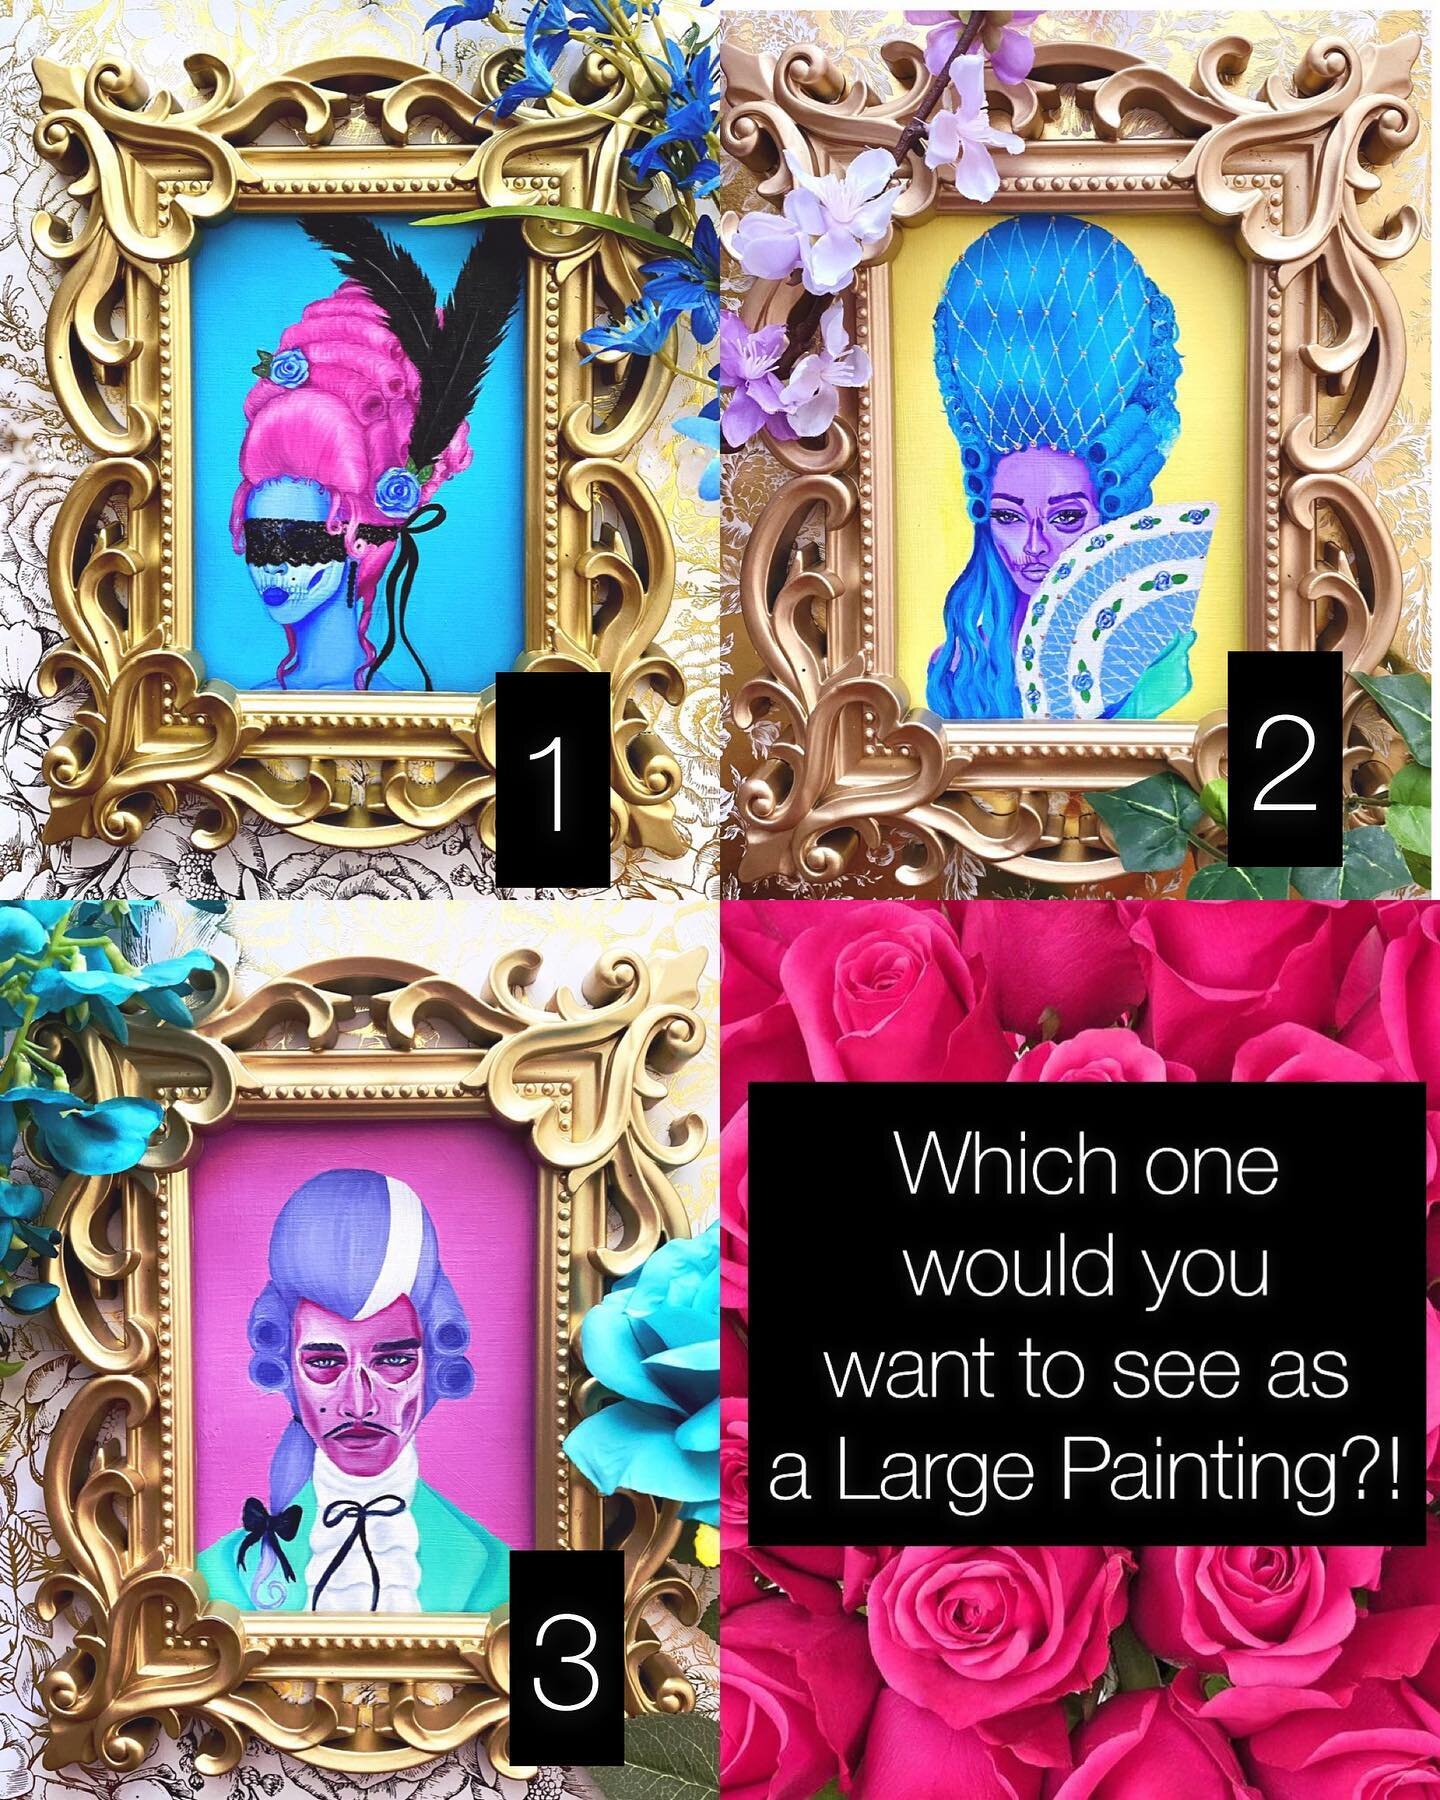 EDIT: THE WINNER IS NUMBER 1. Thank you to everyone who voted. 🥰||Which one do you think would be good as a big juicy painting?! I&rsquo;ve posed the question to my story lookieloos already but I figured I&rsquo;d ask here as well. 
The one y&rsquo;